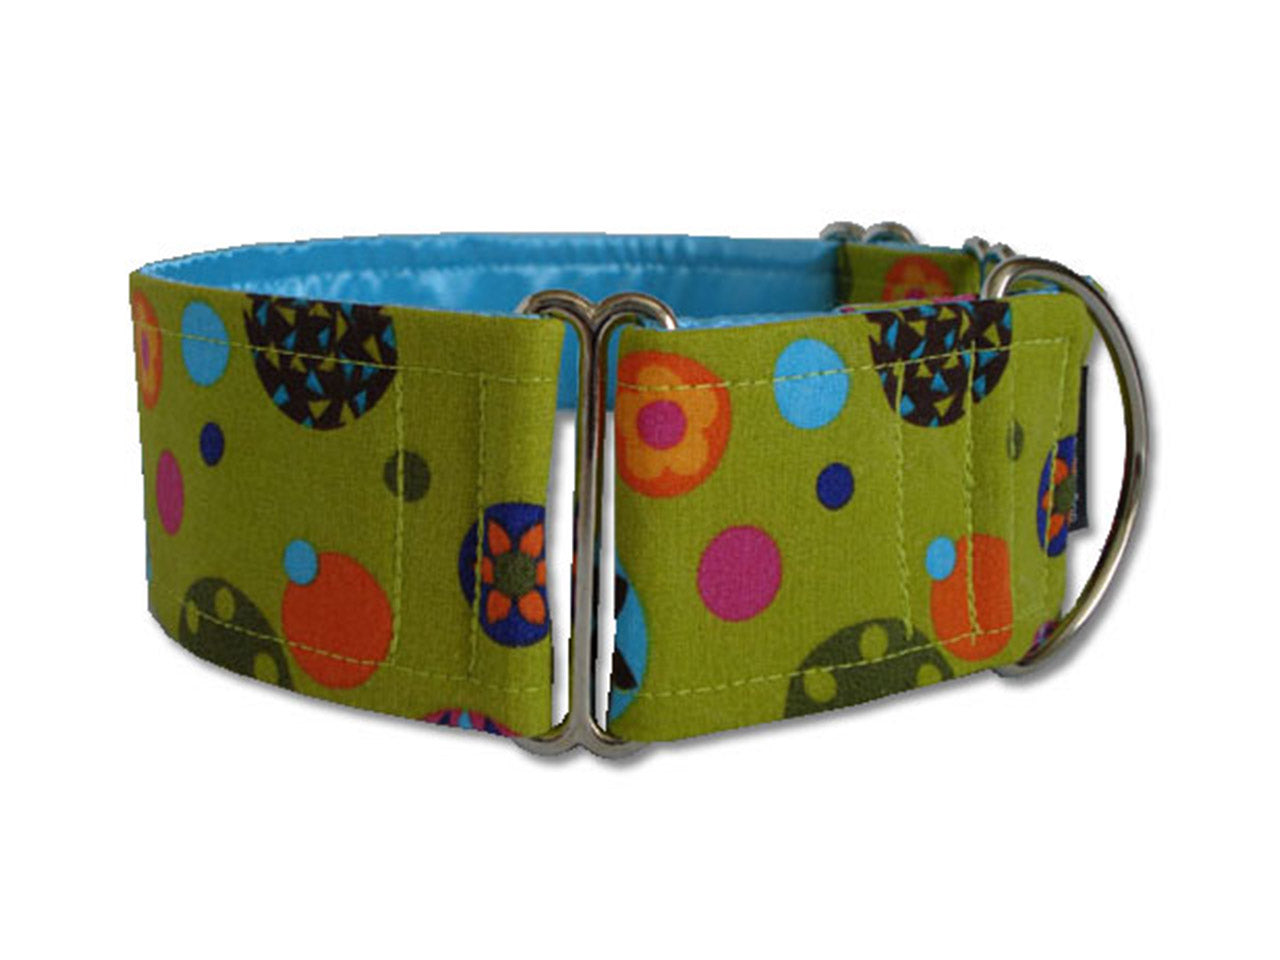 Any cool pooch will dig the groovy vibe of this retro green number with pops of hot pink, blue, and orange.